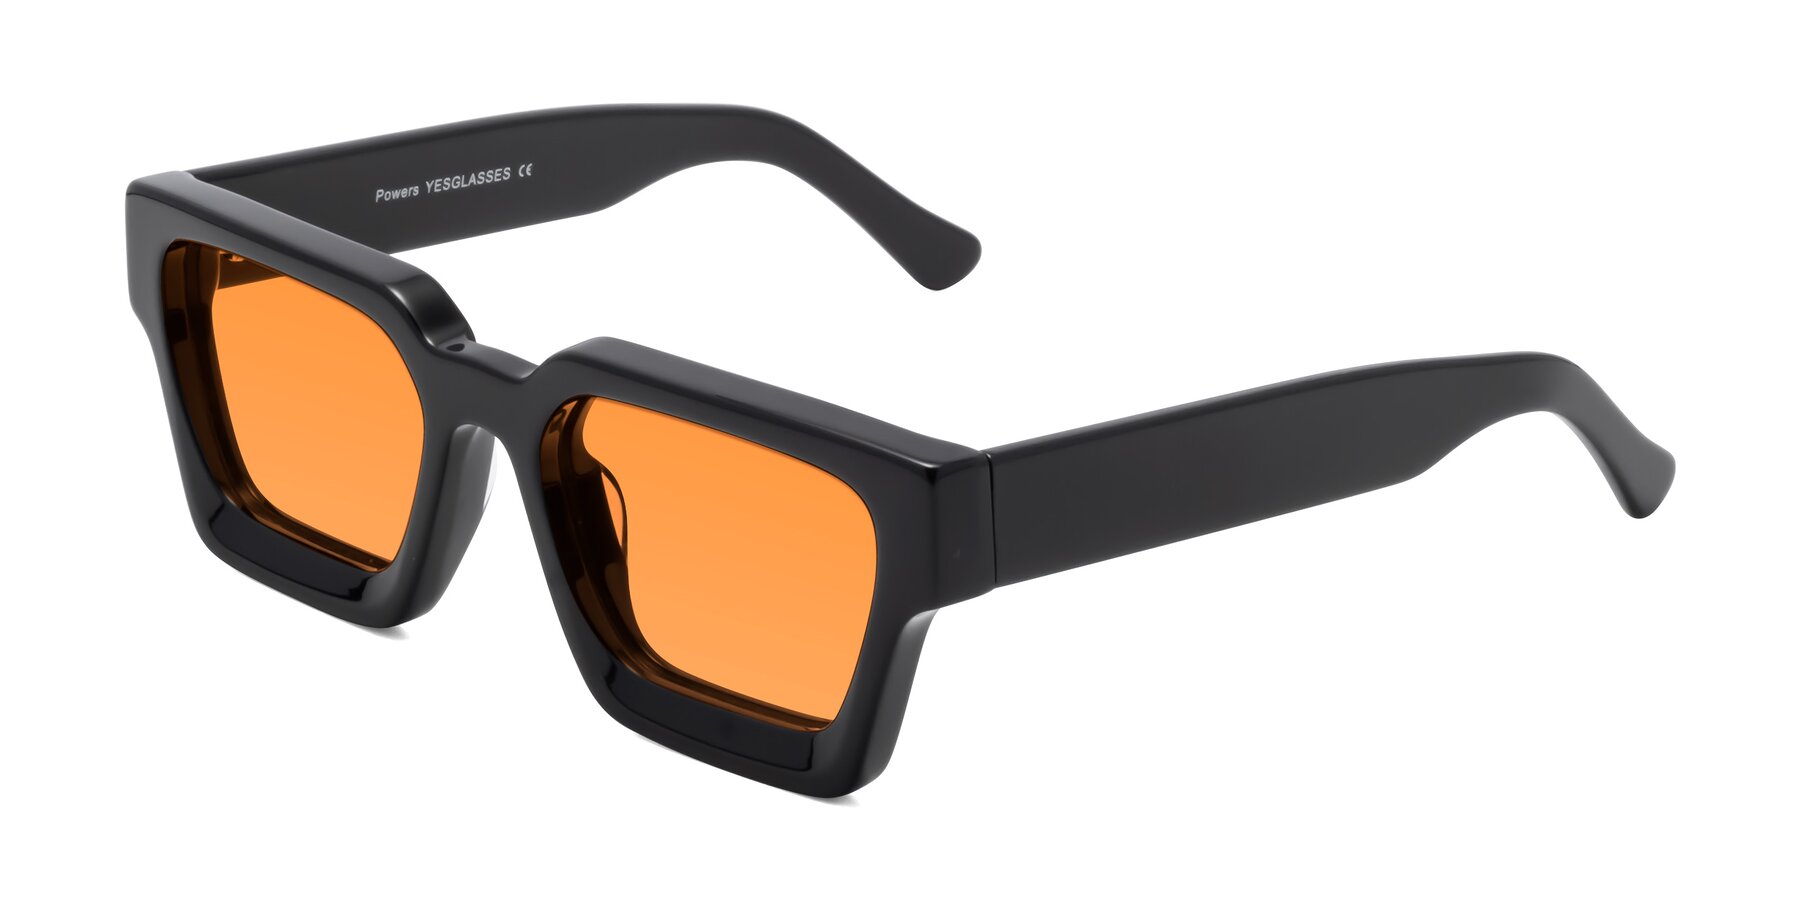 Angle of Powers in Black with Orange Tinted Lenses